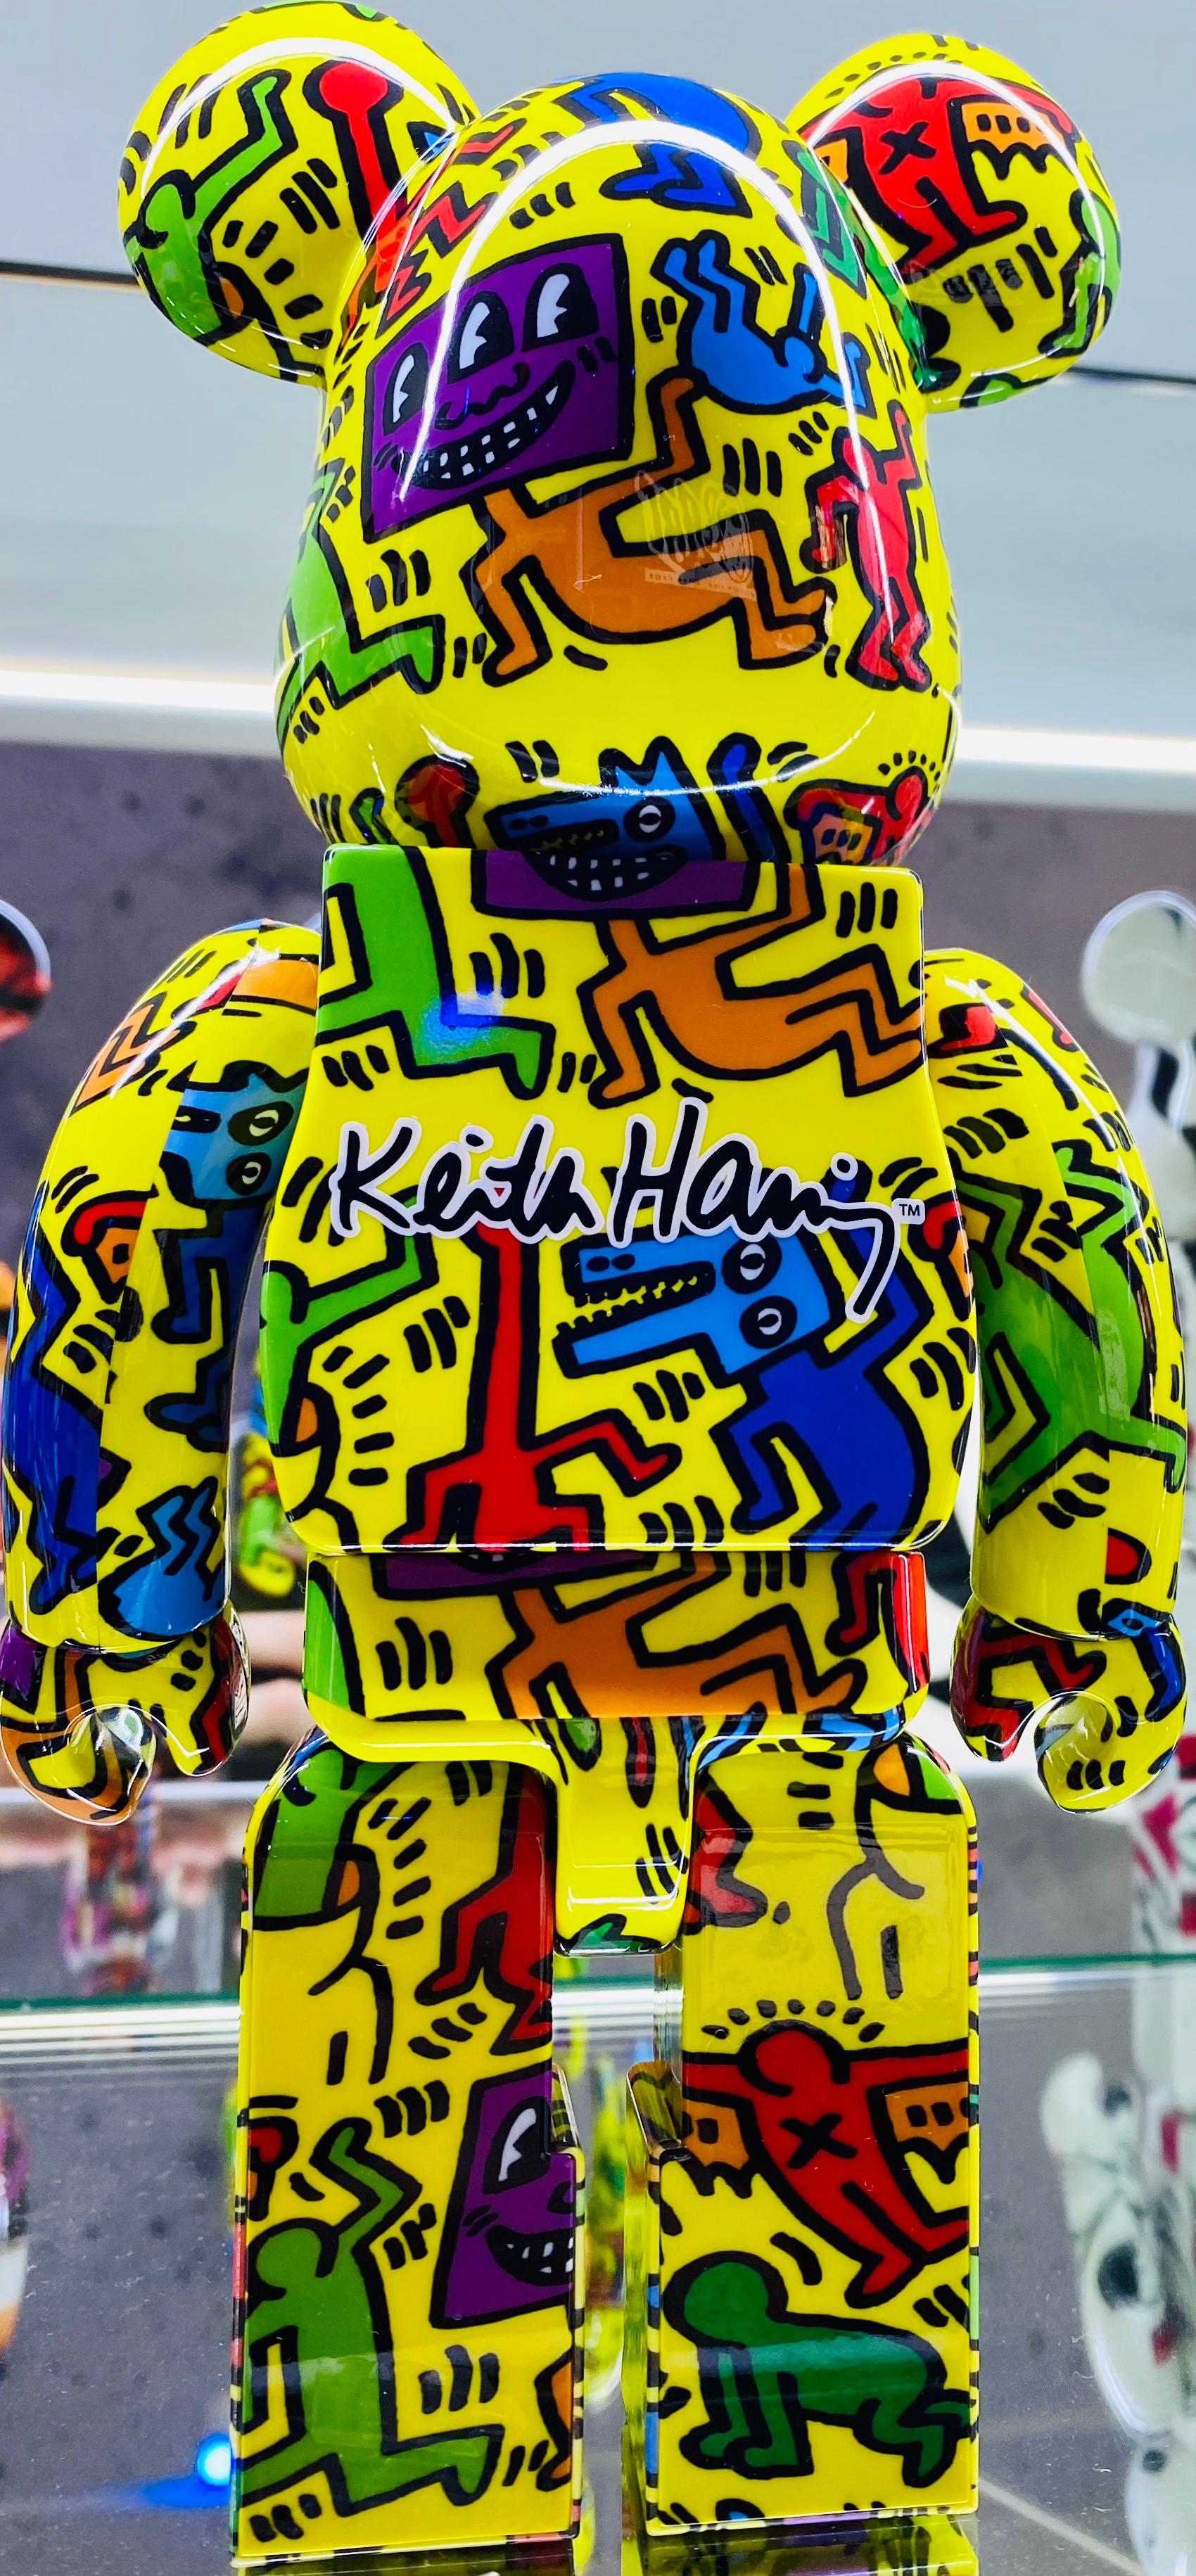 Keith Haring Bearbrick 400 % Companion (Haring BE@RBRICK) – Sculpture von (after) Keith Haring